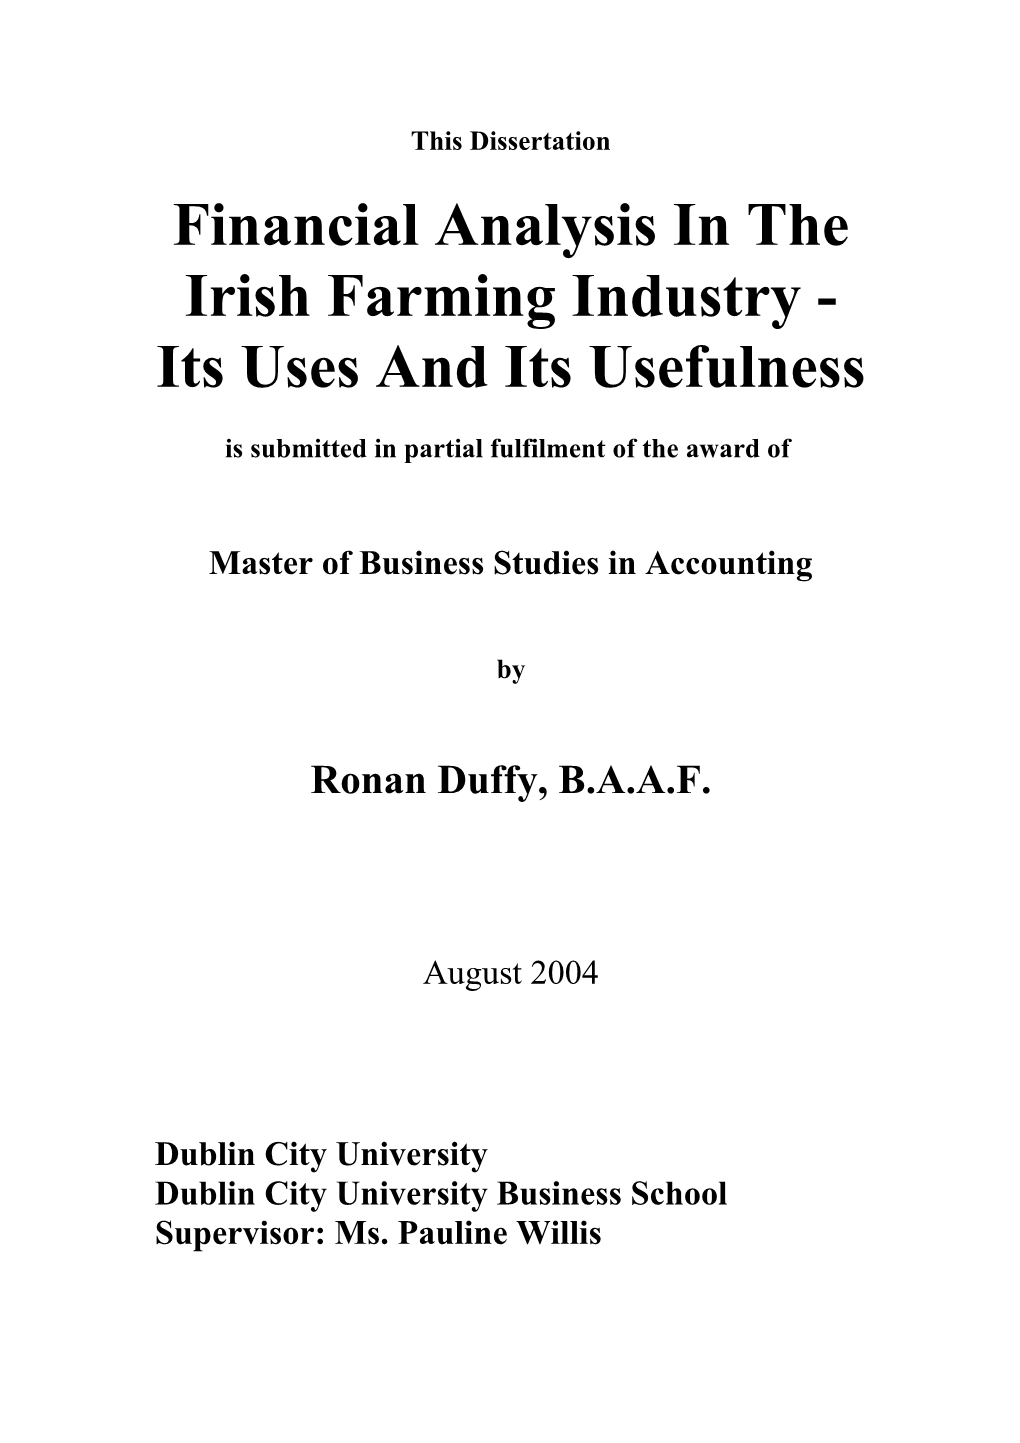 Financial Analysis In The Irish Farming Industry - Its Uses & Its Usefulness